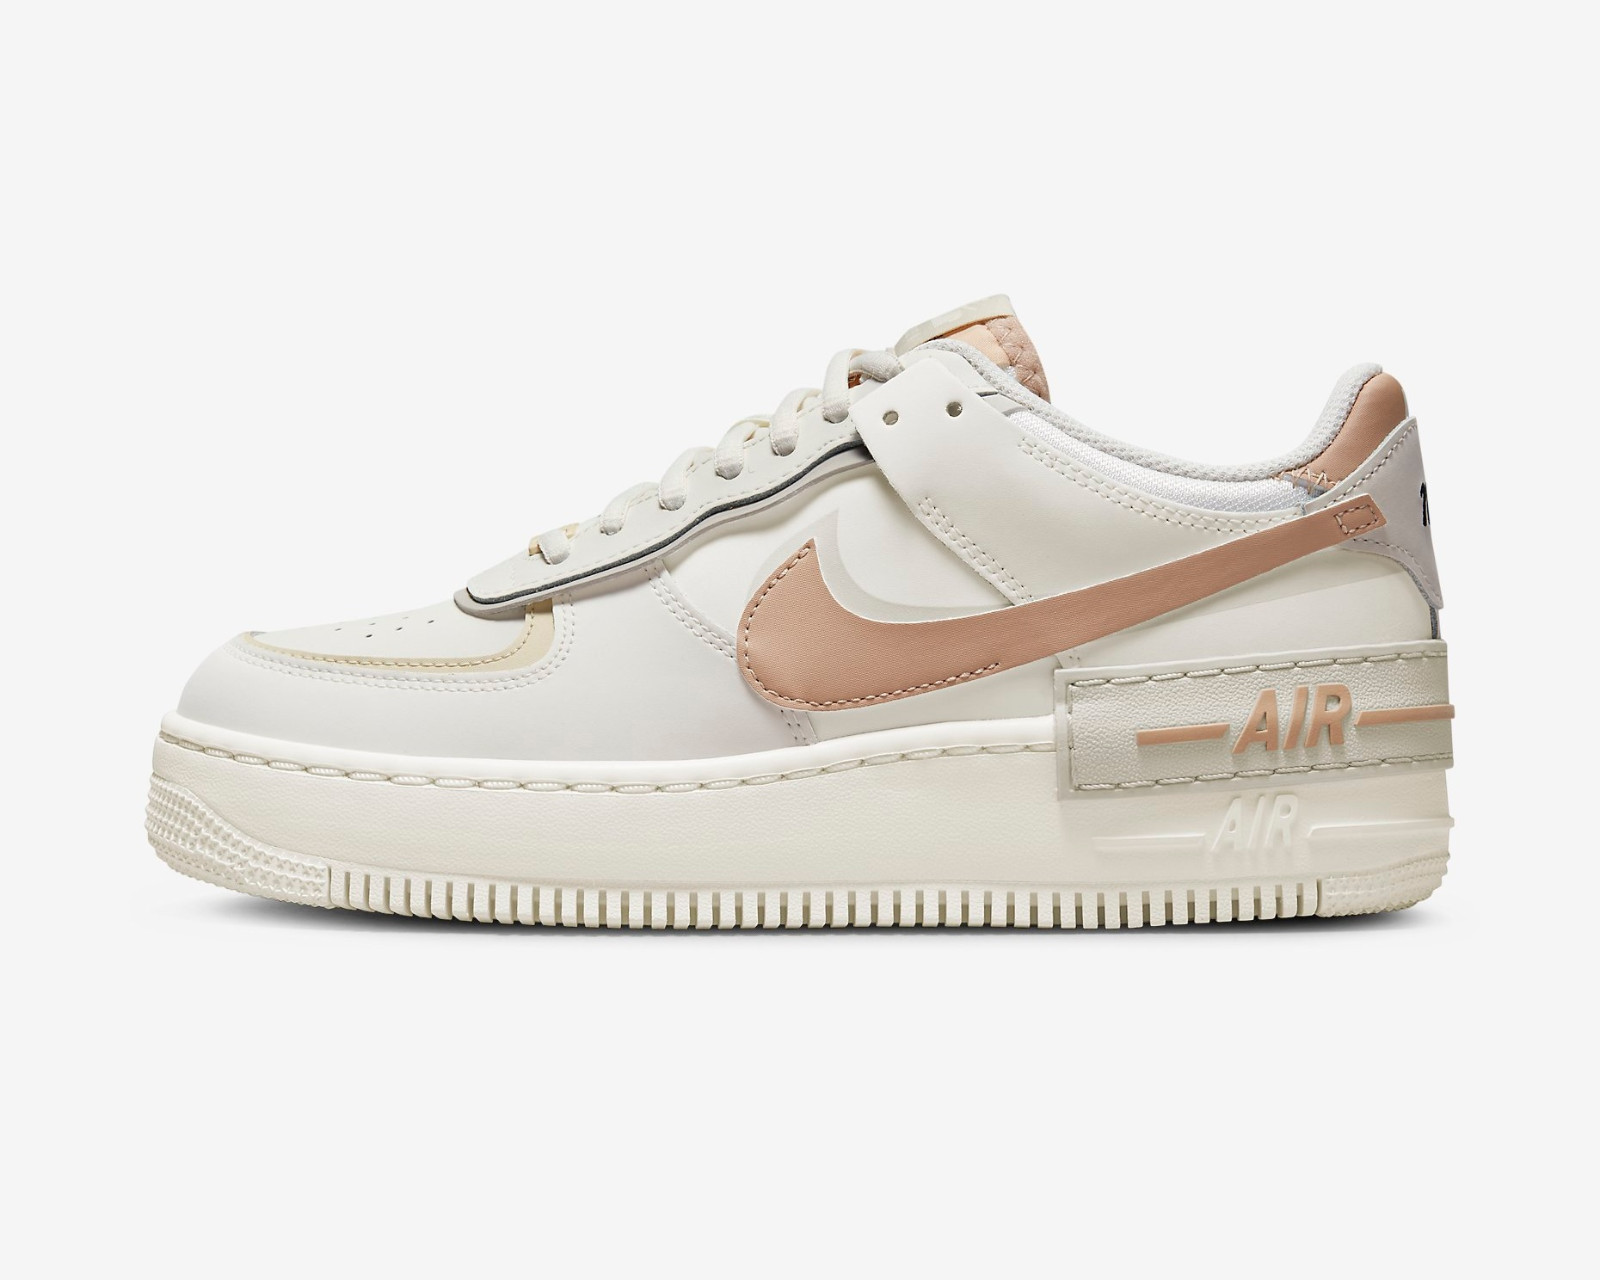 Wissen Een goede vriend emmer 116 - Nike Air Force 1 Shadow Sail Hemp Fossil Light Grey White CI0919 -  GmarShops - Customize the Nike Air Zoom Structure 18 now